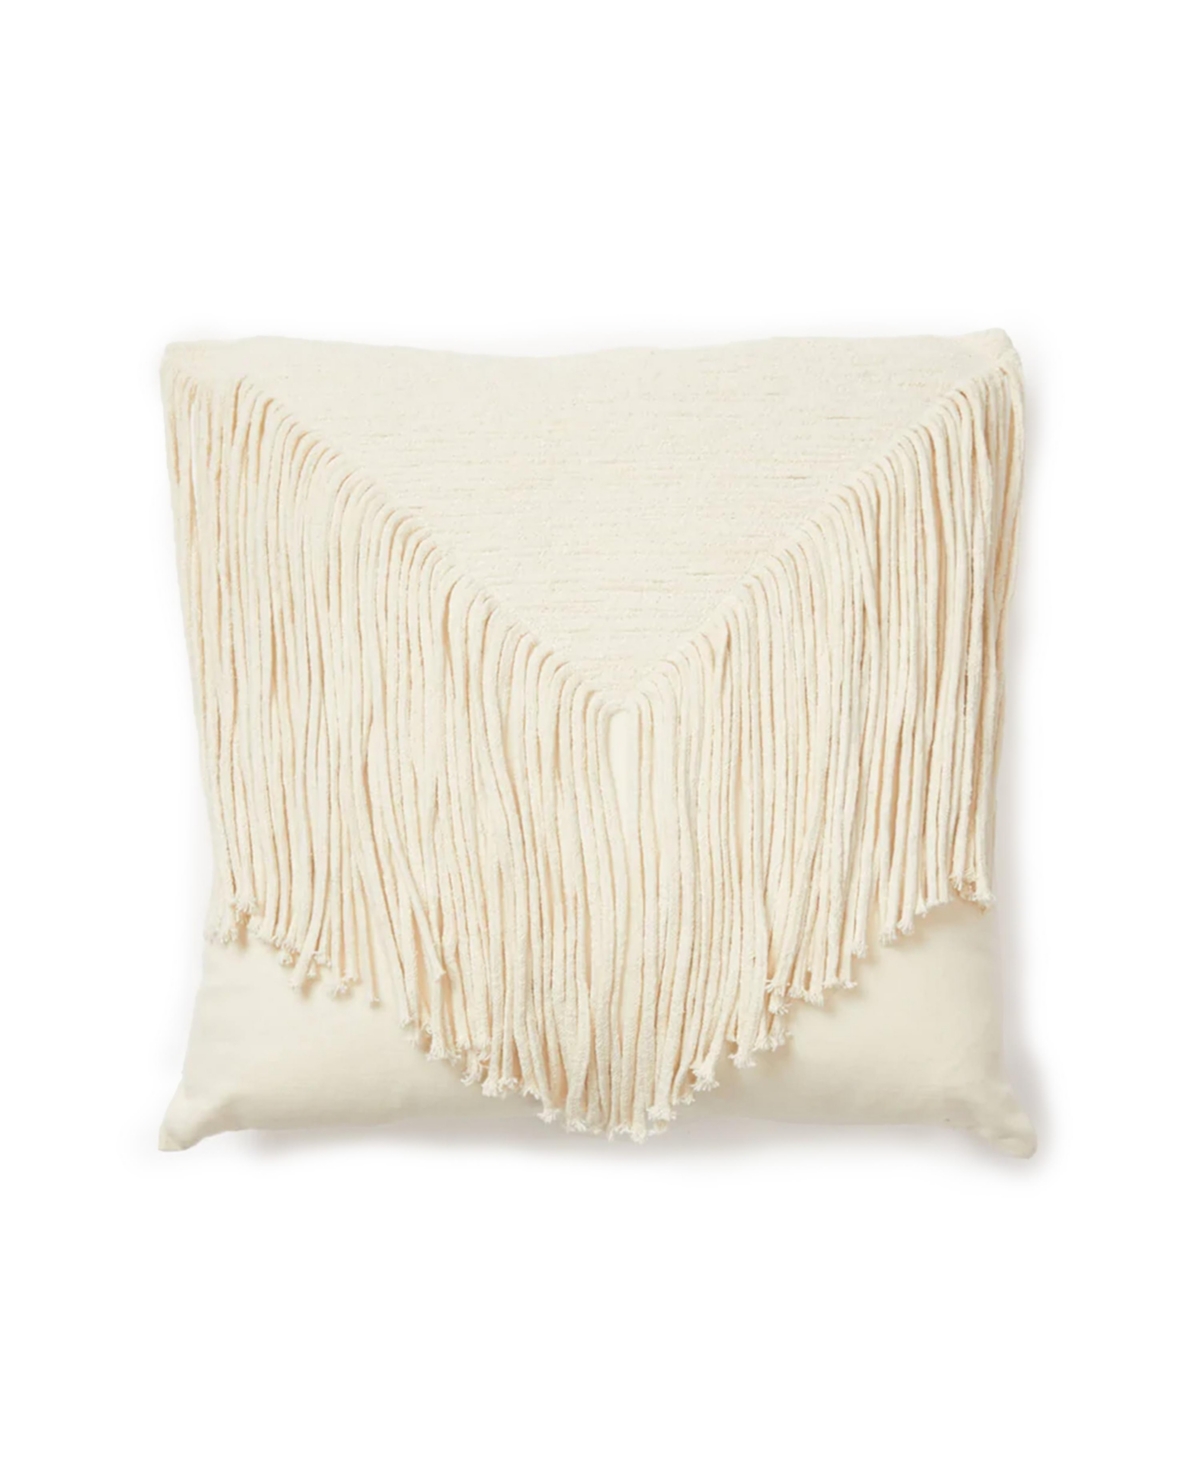 Dormify Desert Fringe Square Pillow, 20" X 20", Ultra-cute Styles To Personalize Your Room In Beige